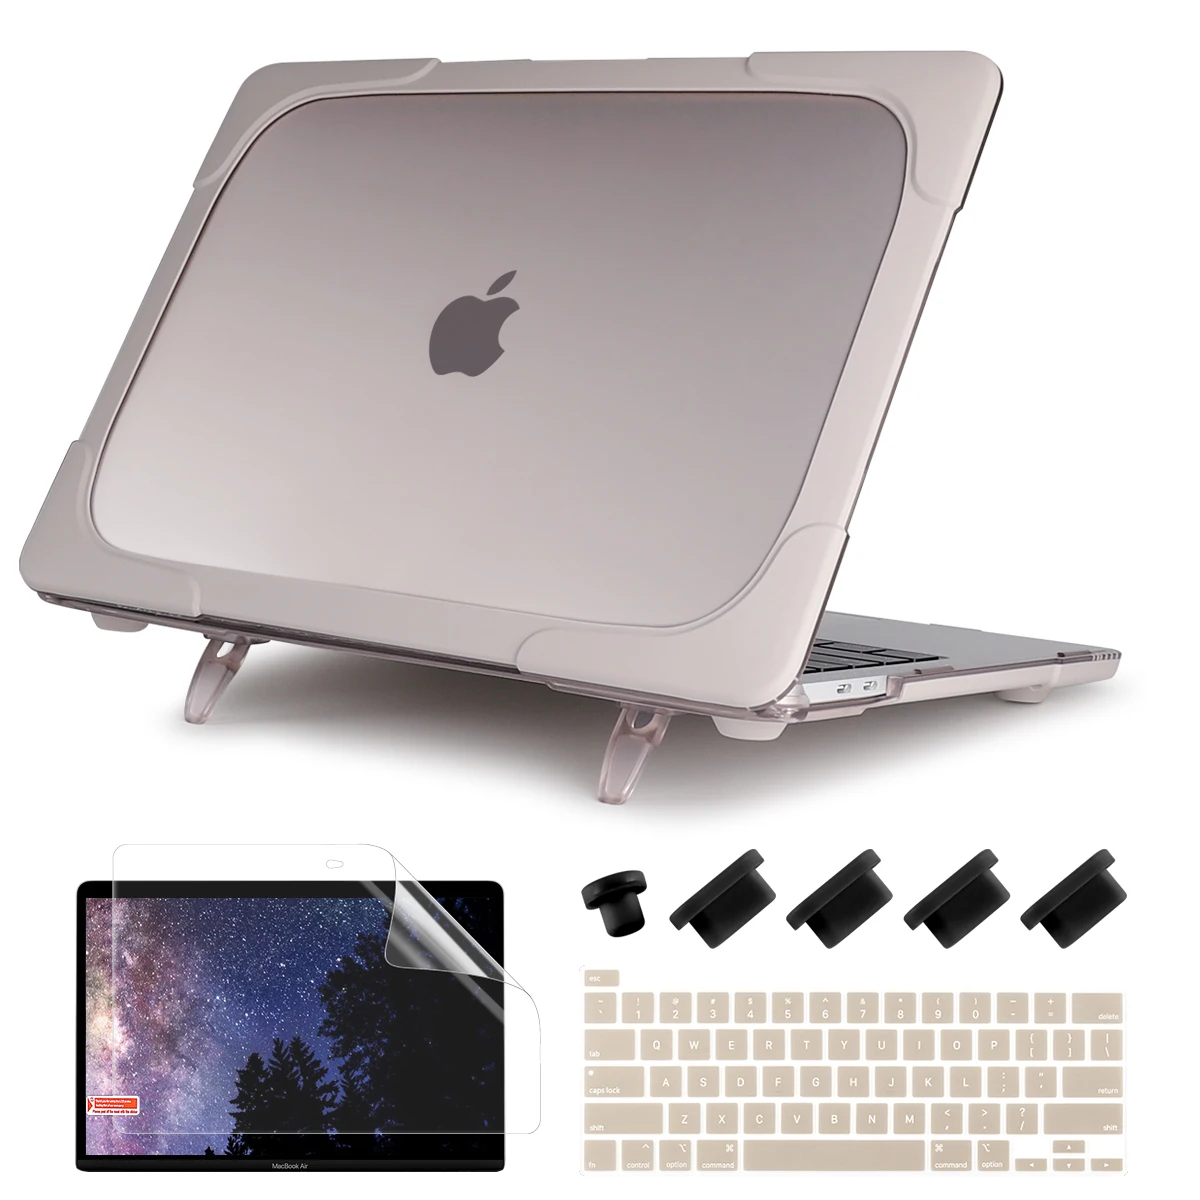 Rugged Shockproof Computer Case TPU For Macbook Air Pro Retina 11" 12" 13" 15" 